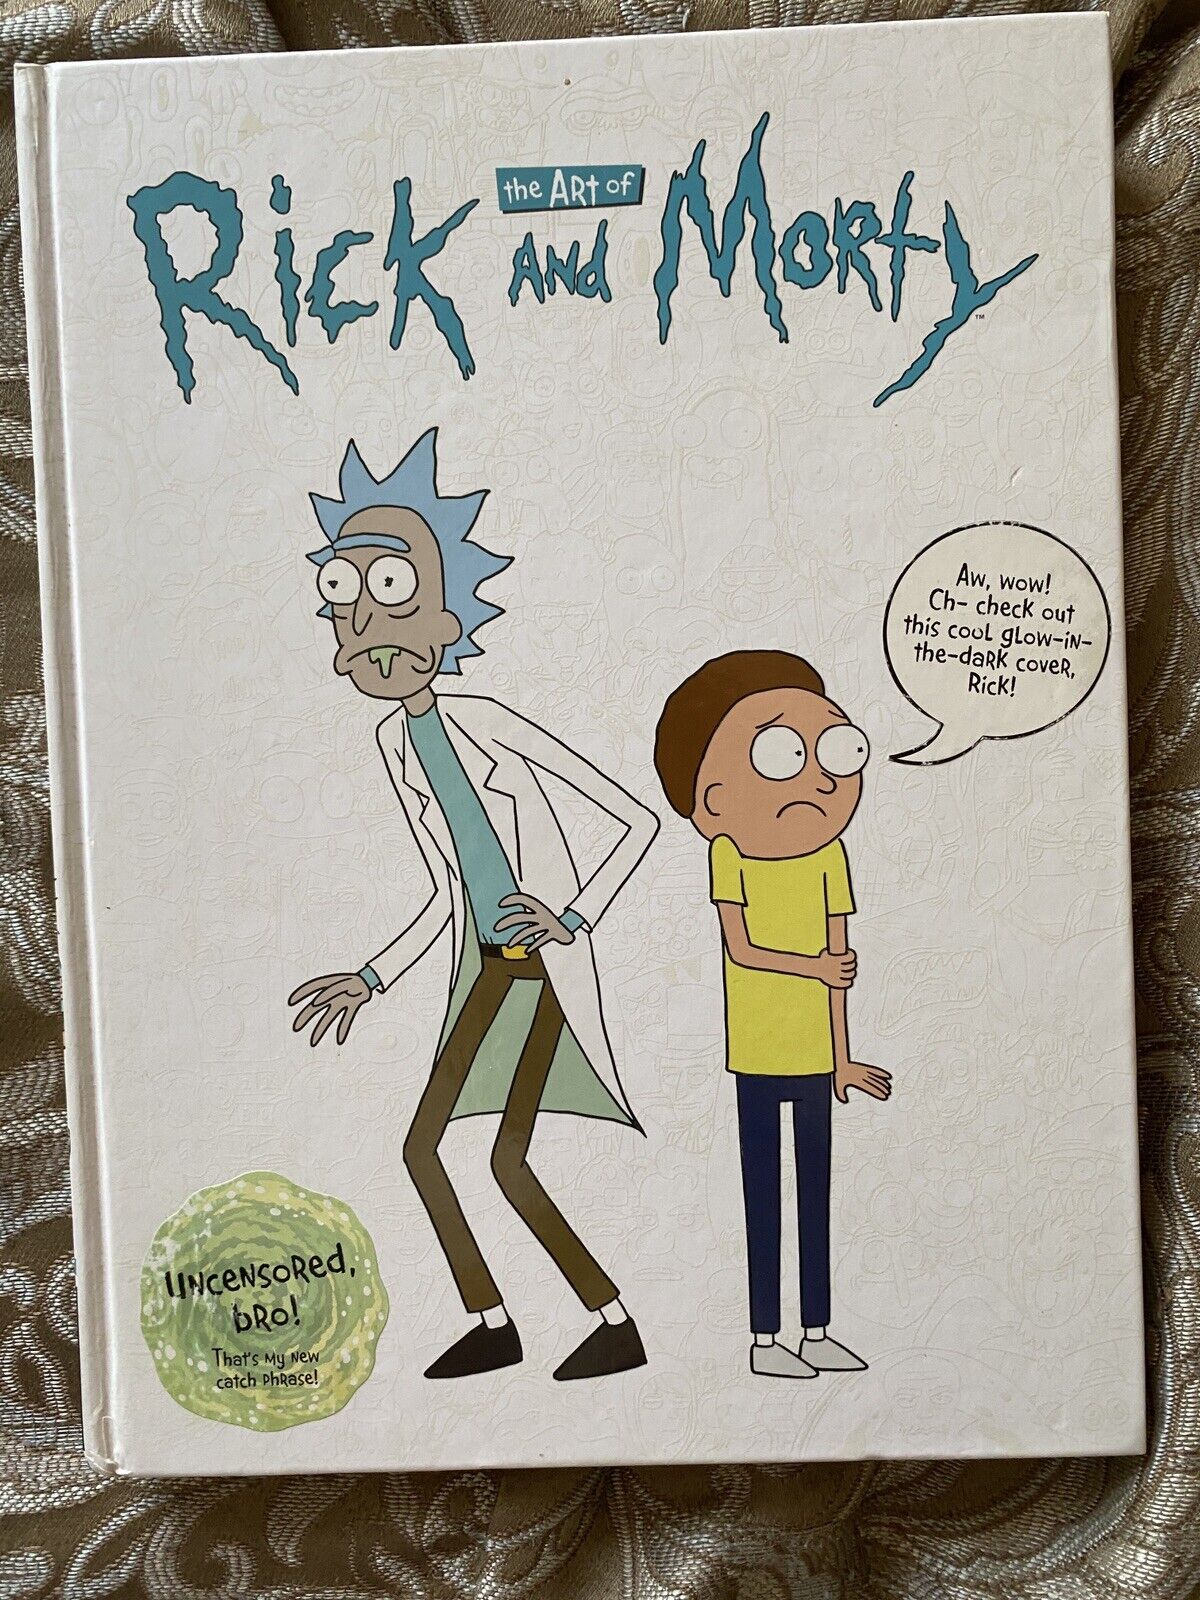 The Art of Rick and Morty by Justin Roiland (2017, Hardcover) First Edition